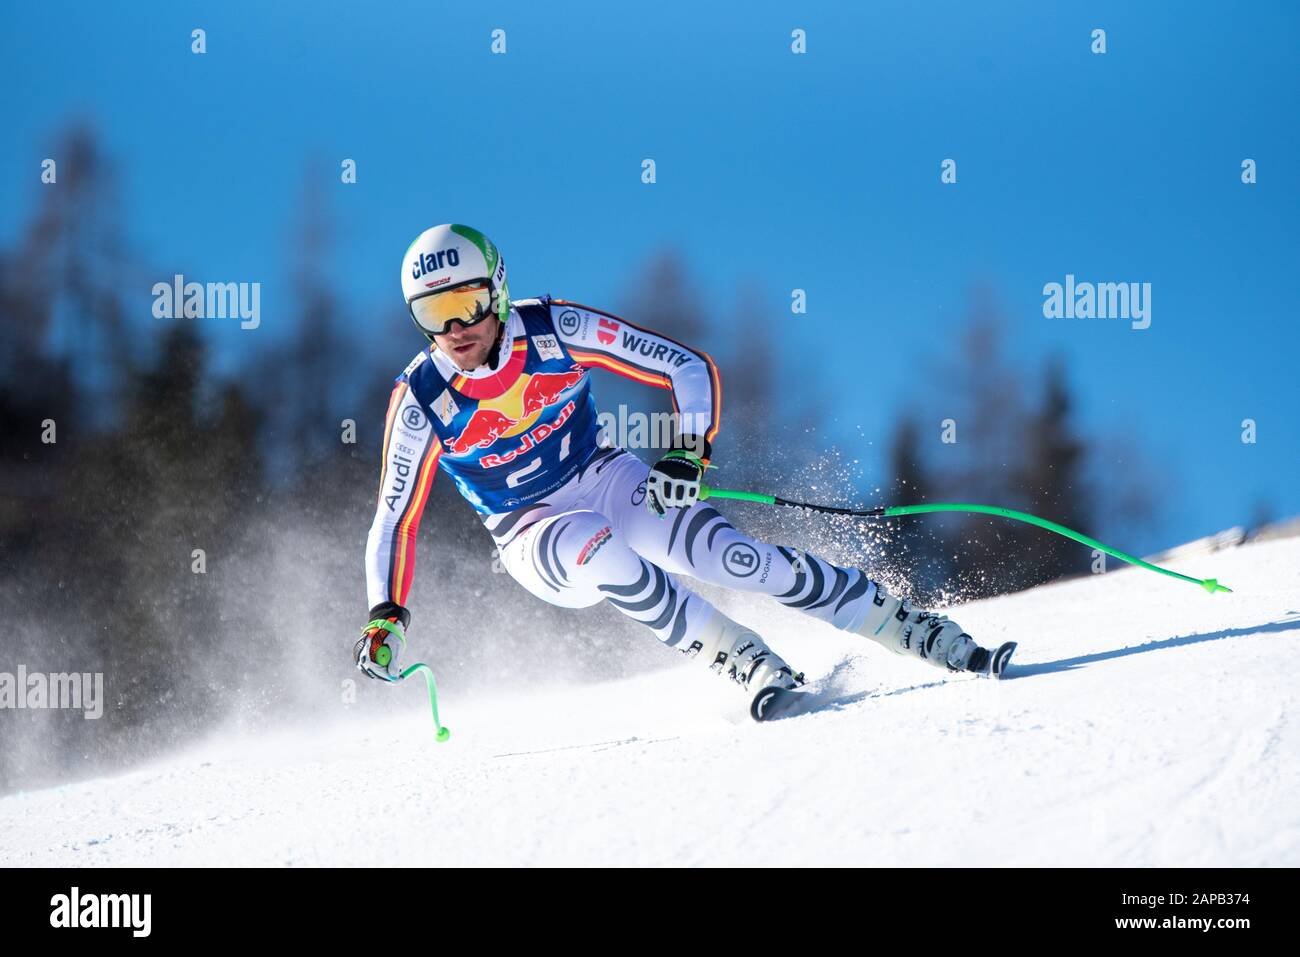 Dominik Schwaiger of Germany at the Ski Alpin: 80. Hahnenkamm Race 2020 - Audi FIS Alpine Ski World Cup - Men's Downhill Training at the Streif on January 22, 2020 in Kitzbuehel, AUSTRIA. (Photo by Horst Ettensberger/ESPA-Images) Stock Photo